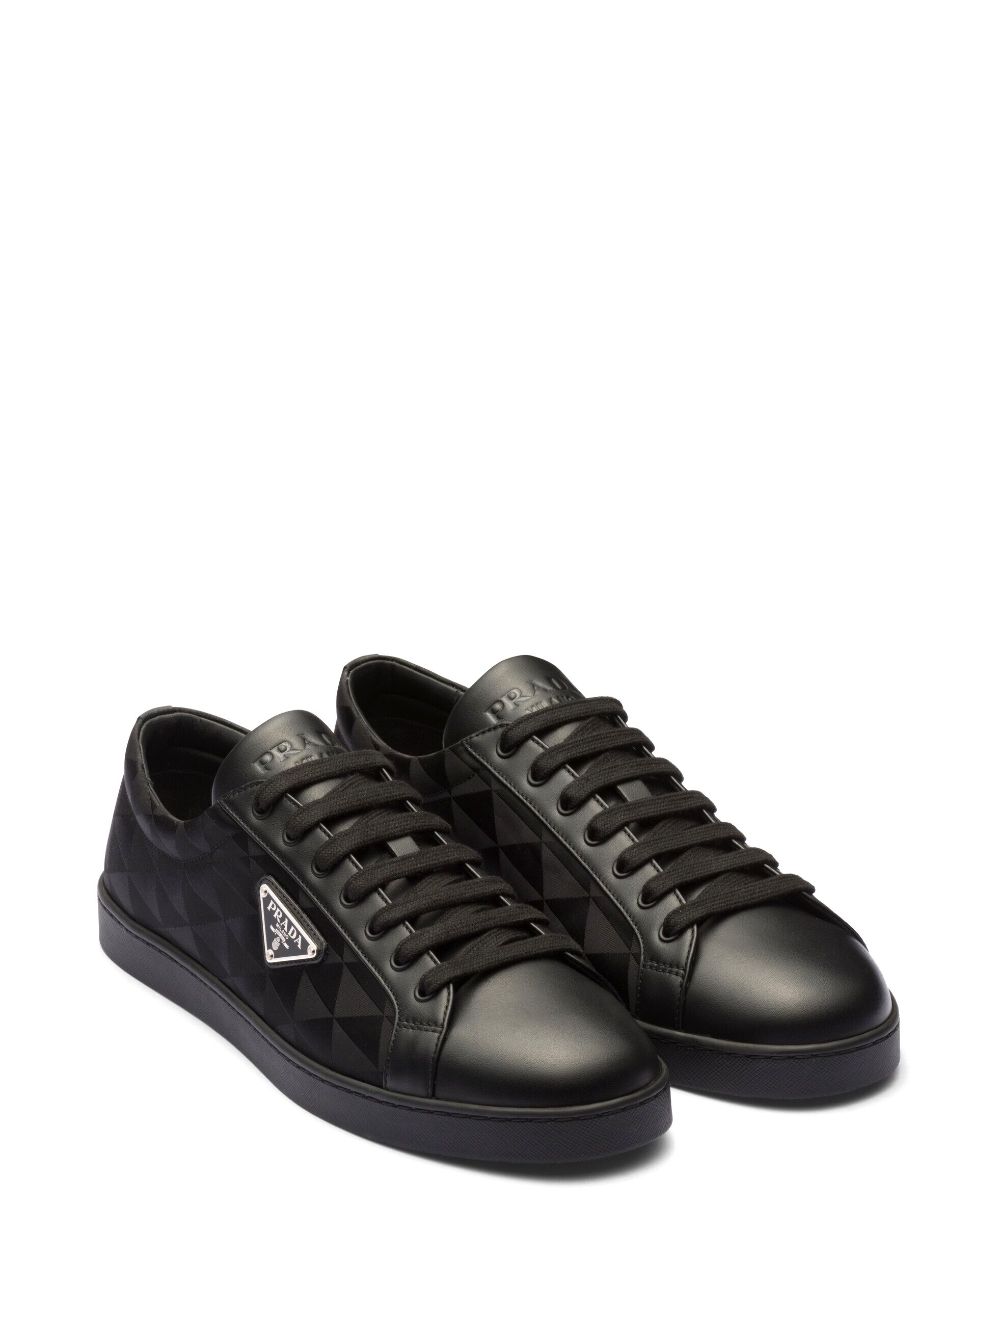 Image 2 of Prada triangle-logo lace-up sneakers